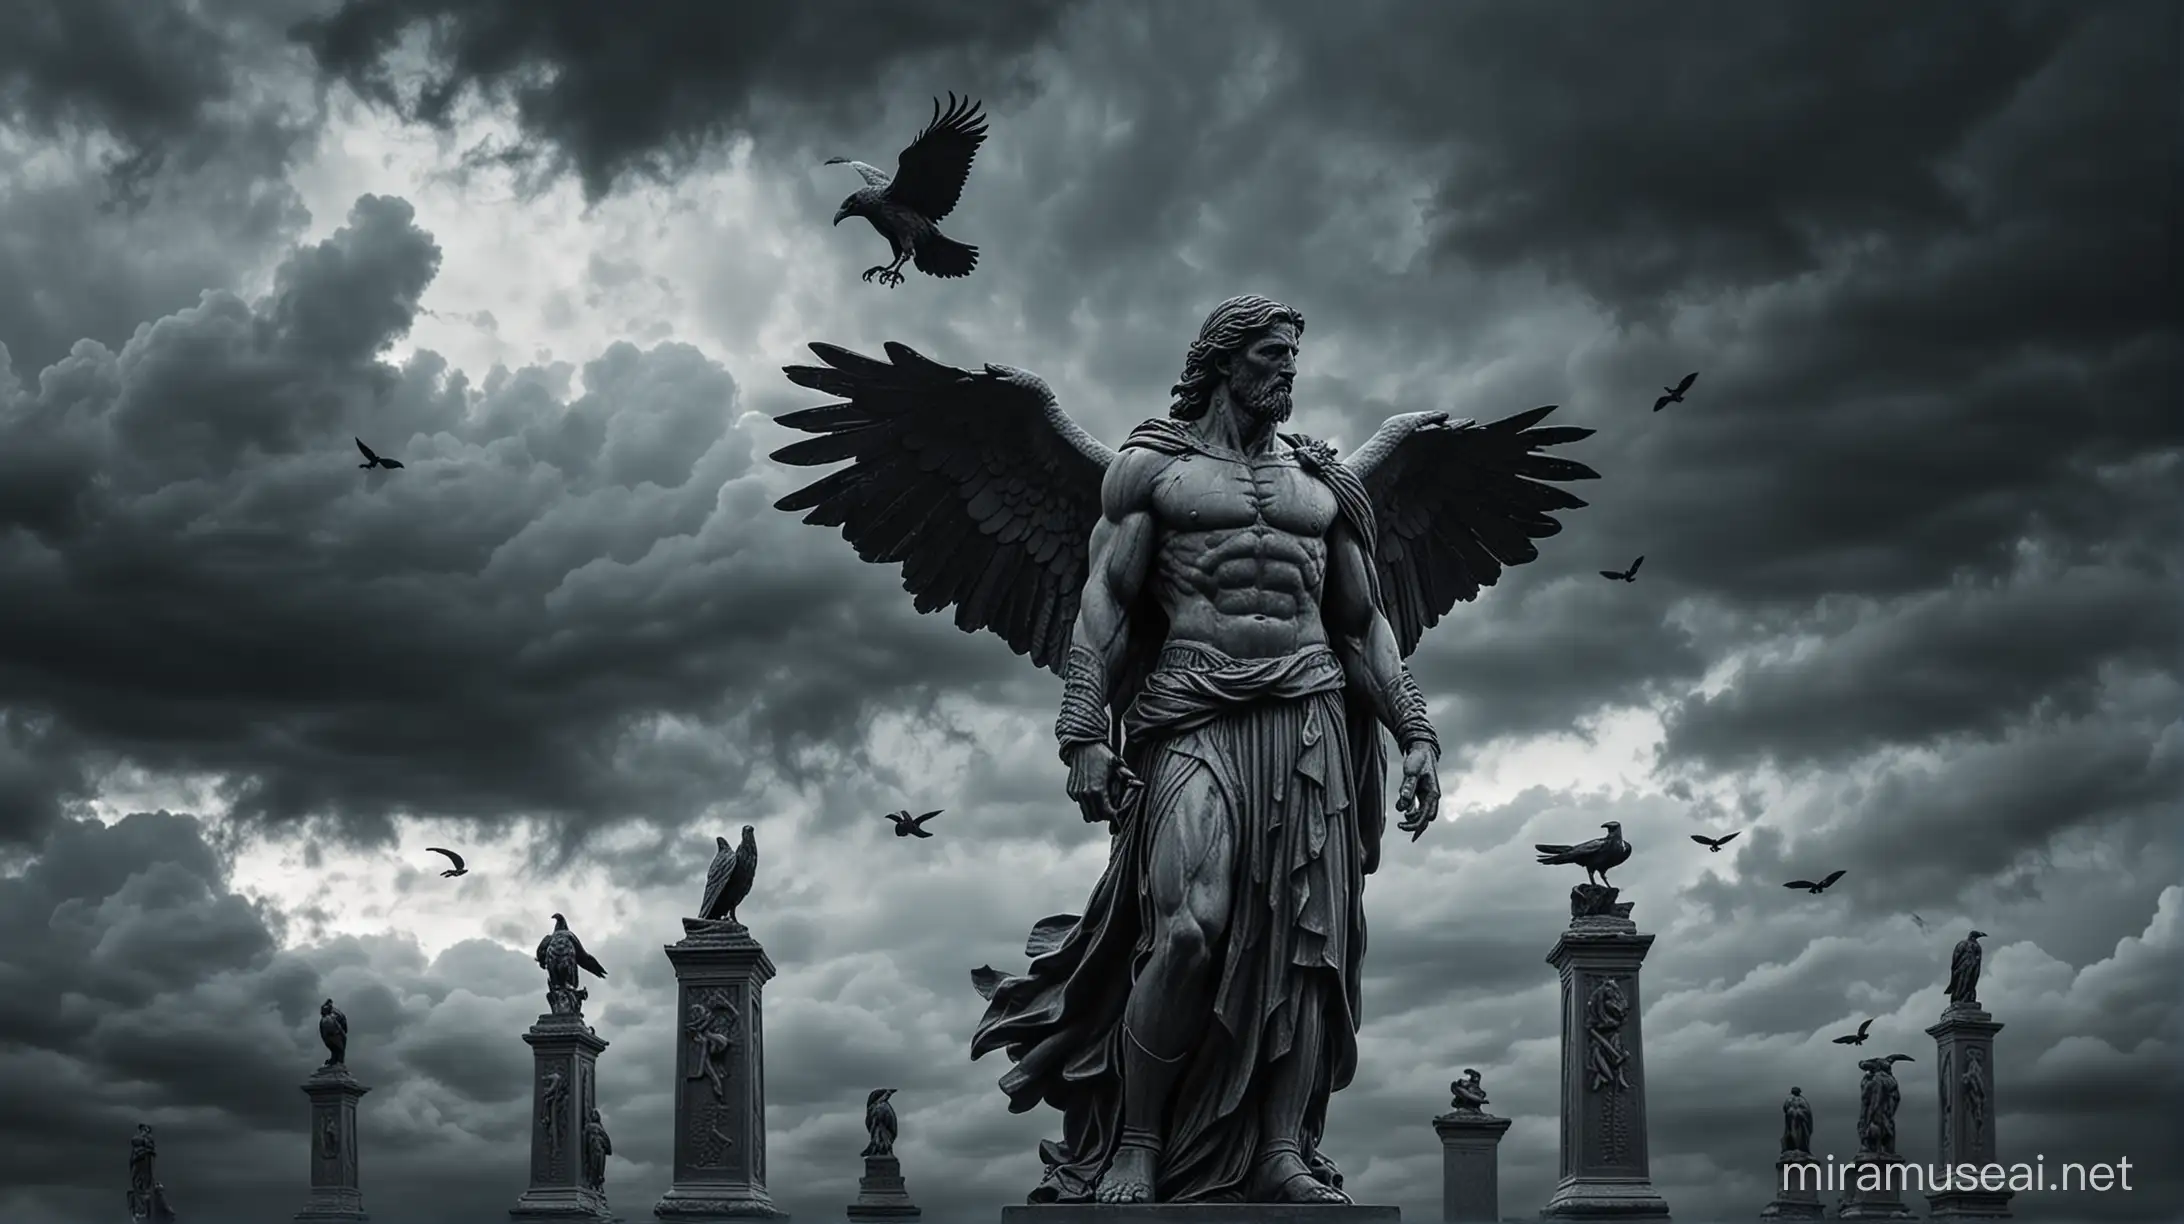 Stoic Muscular Statues Inspirational Motivation in Dark Background with Flying Ravens